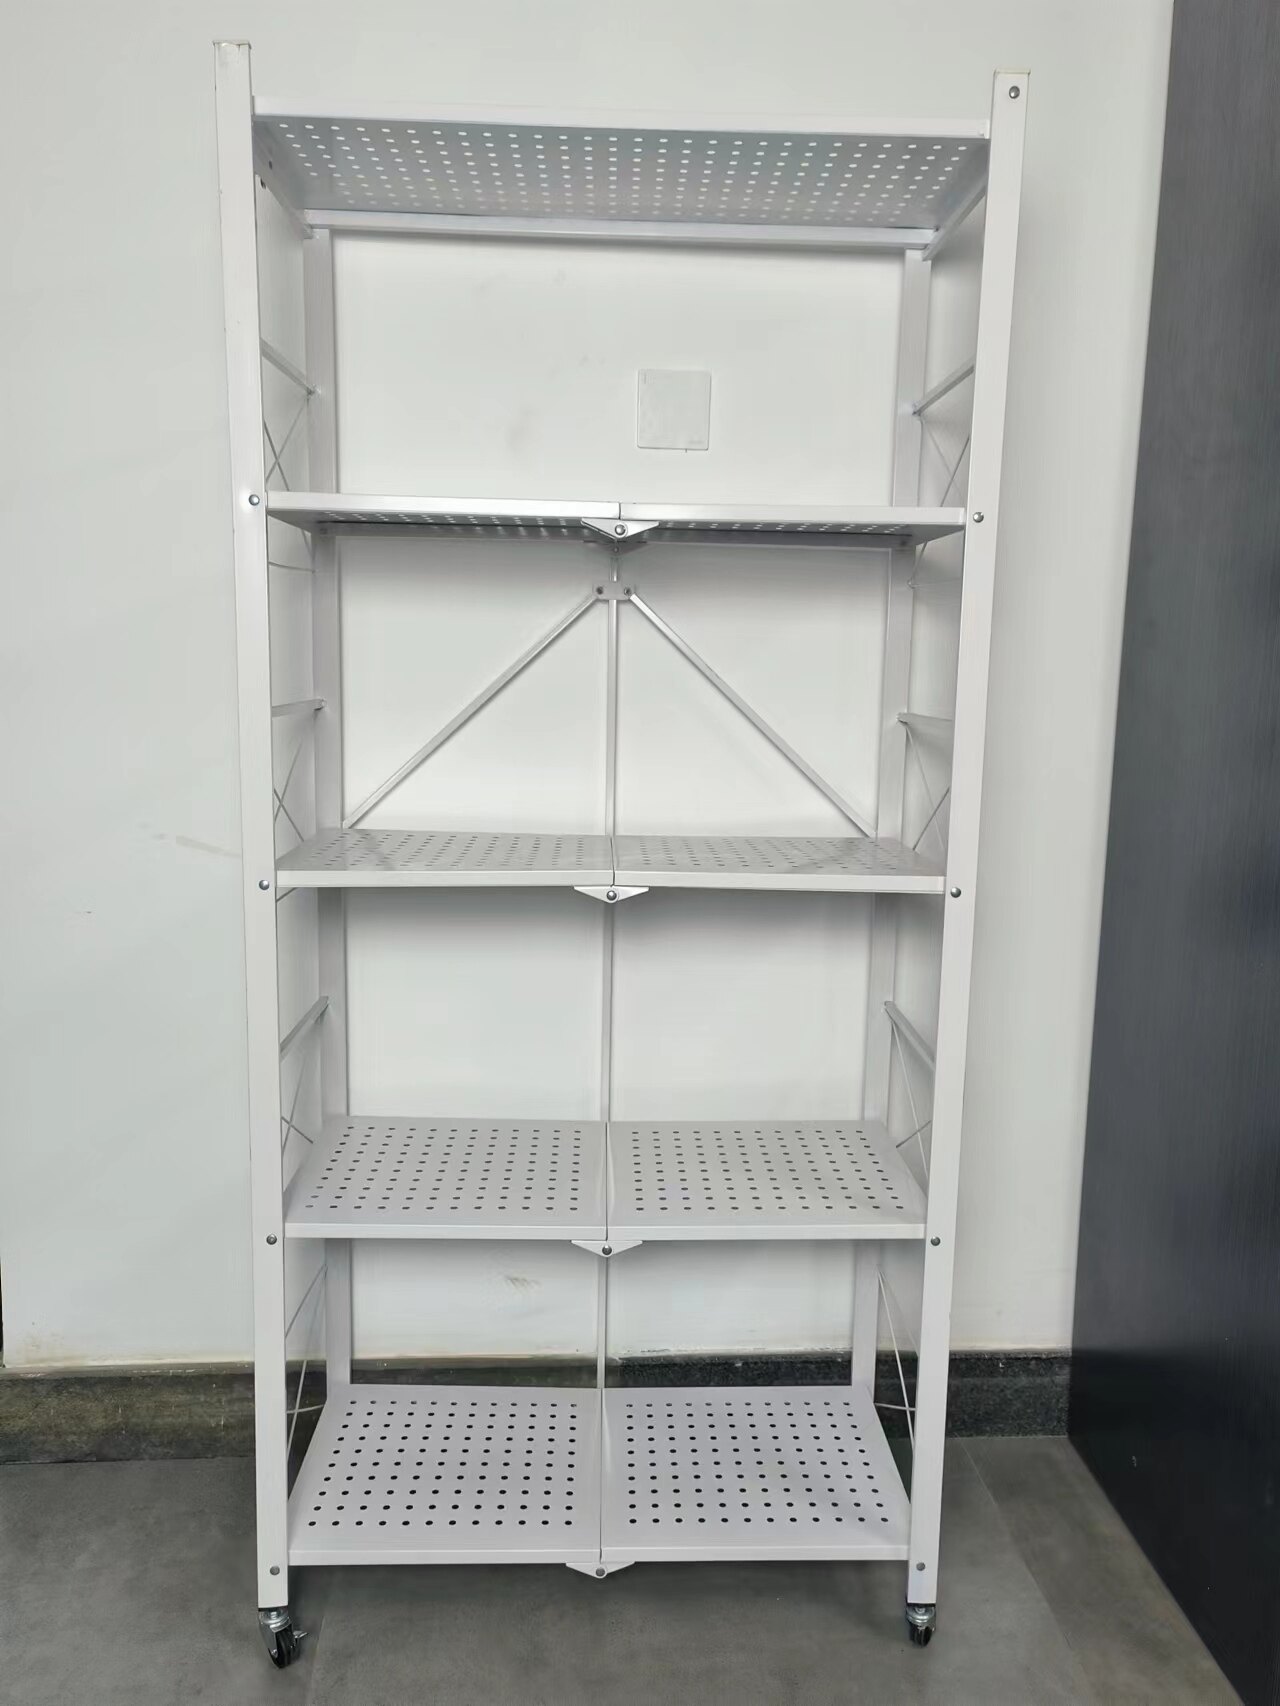 Organize Your Kitchen with China Kitchen Steel Storage Racks for Ultimate Efficiency